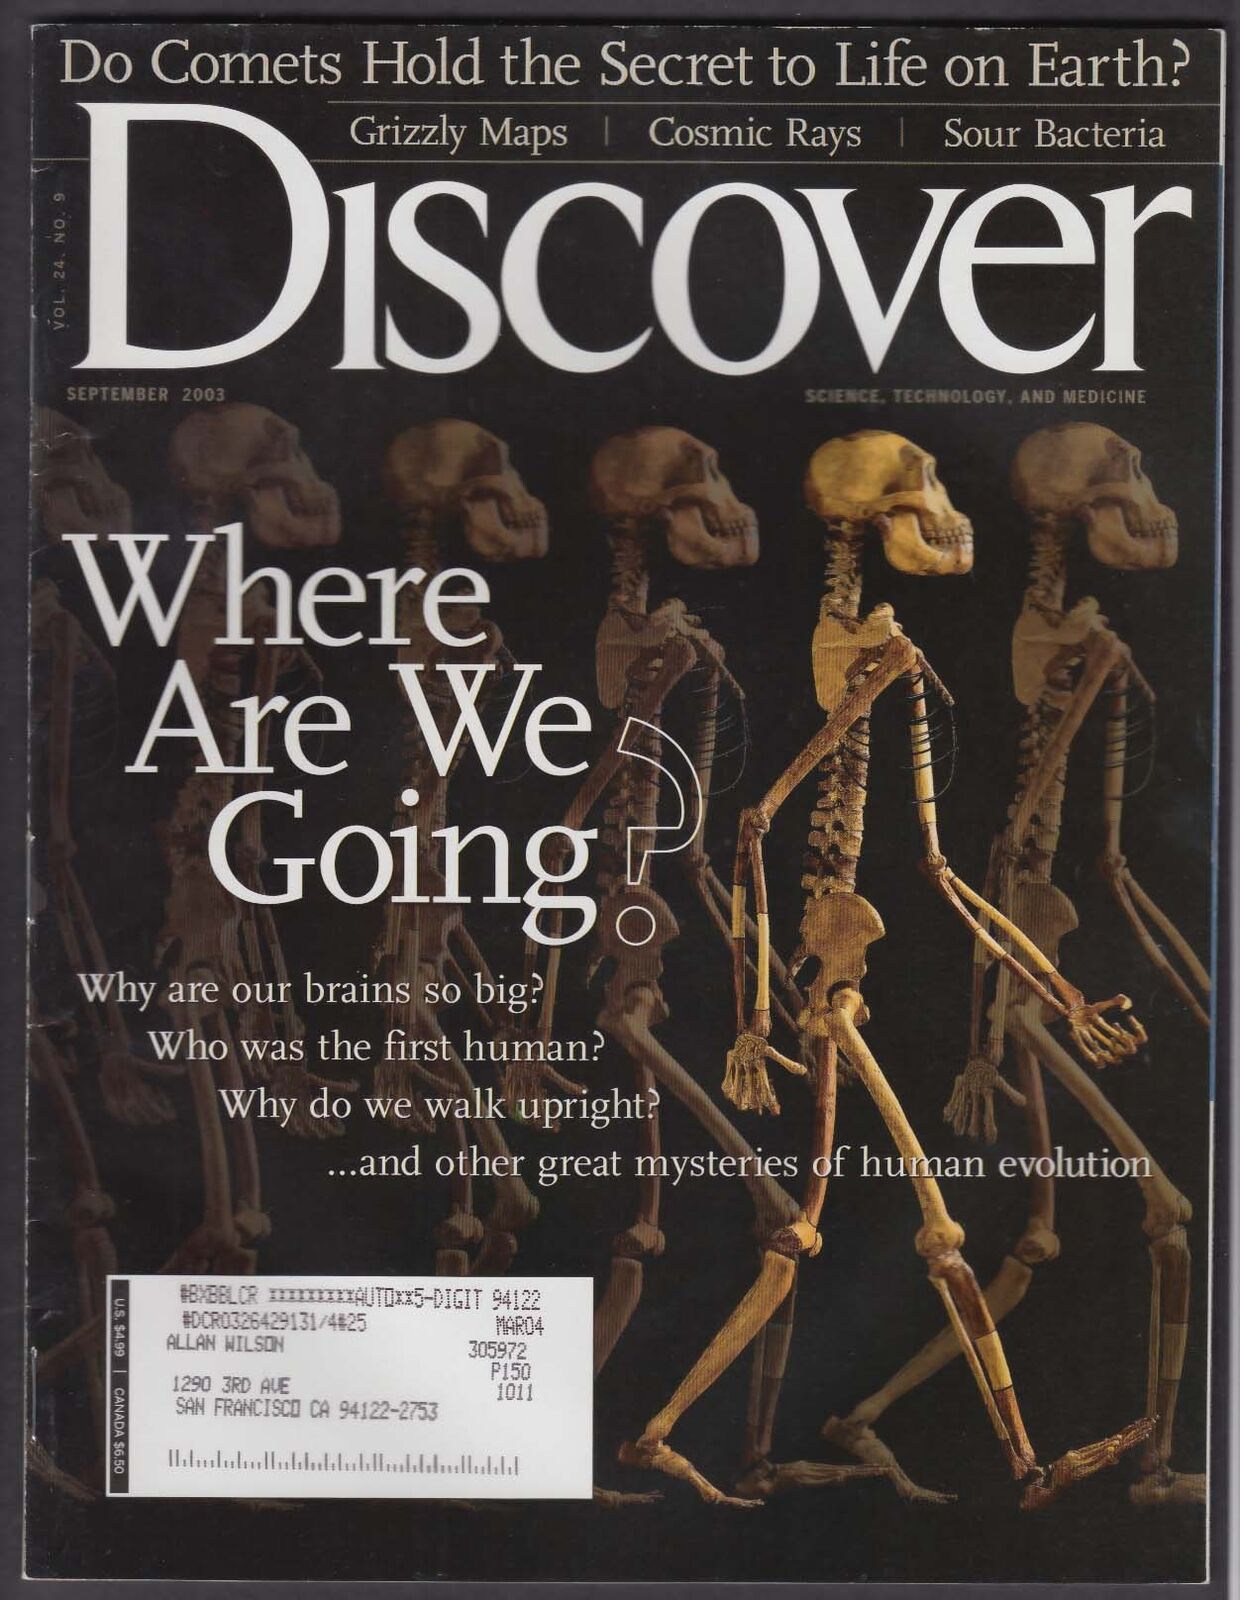 DISCOVER Human evolution; comets; cosmic rays, comets; sour bacteria 9 2003